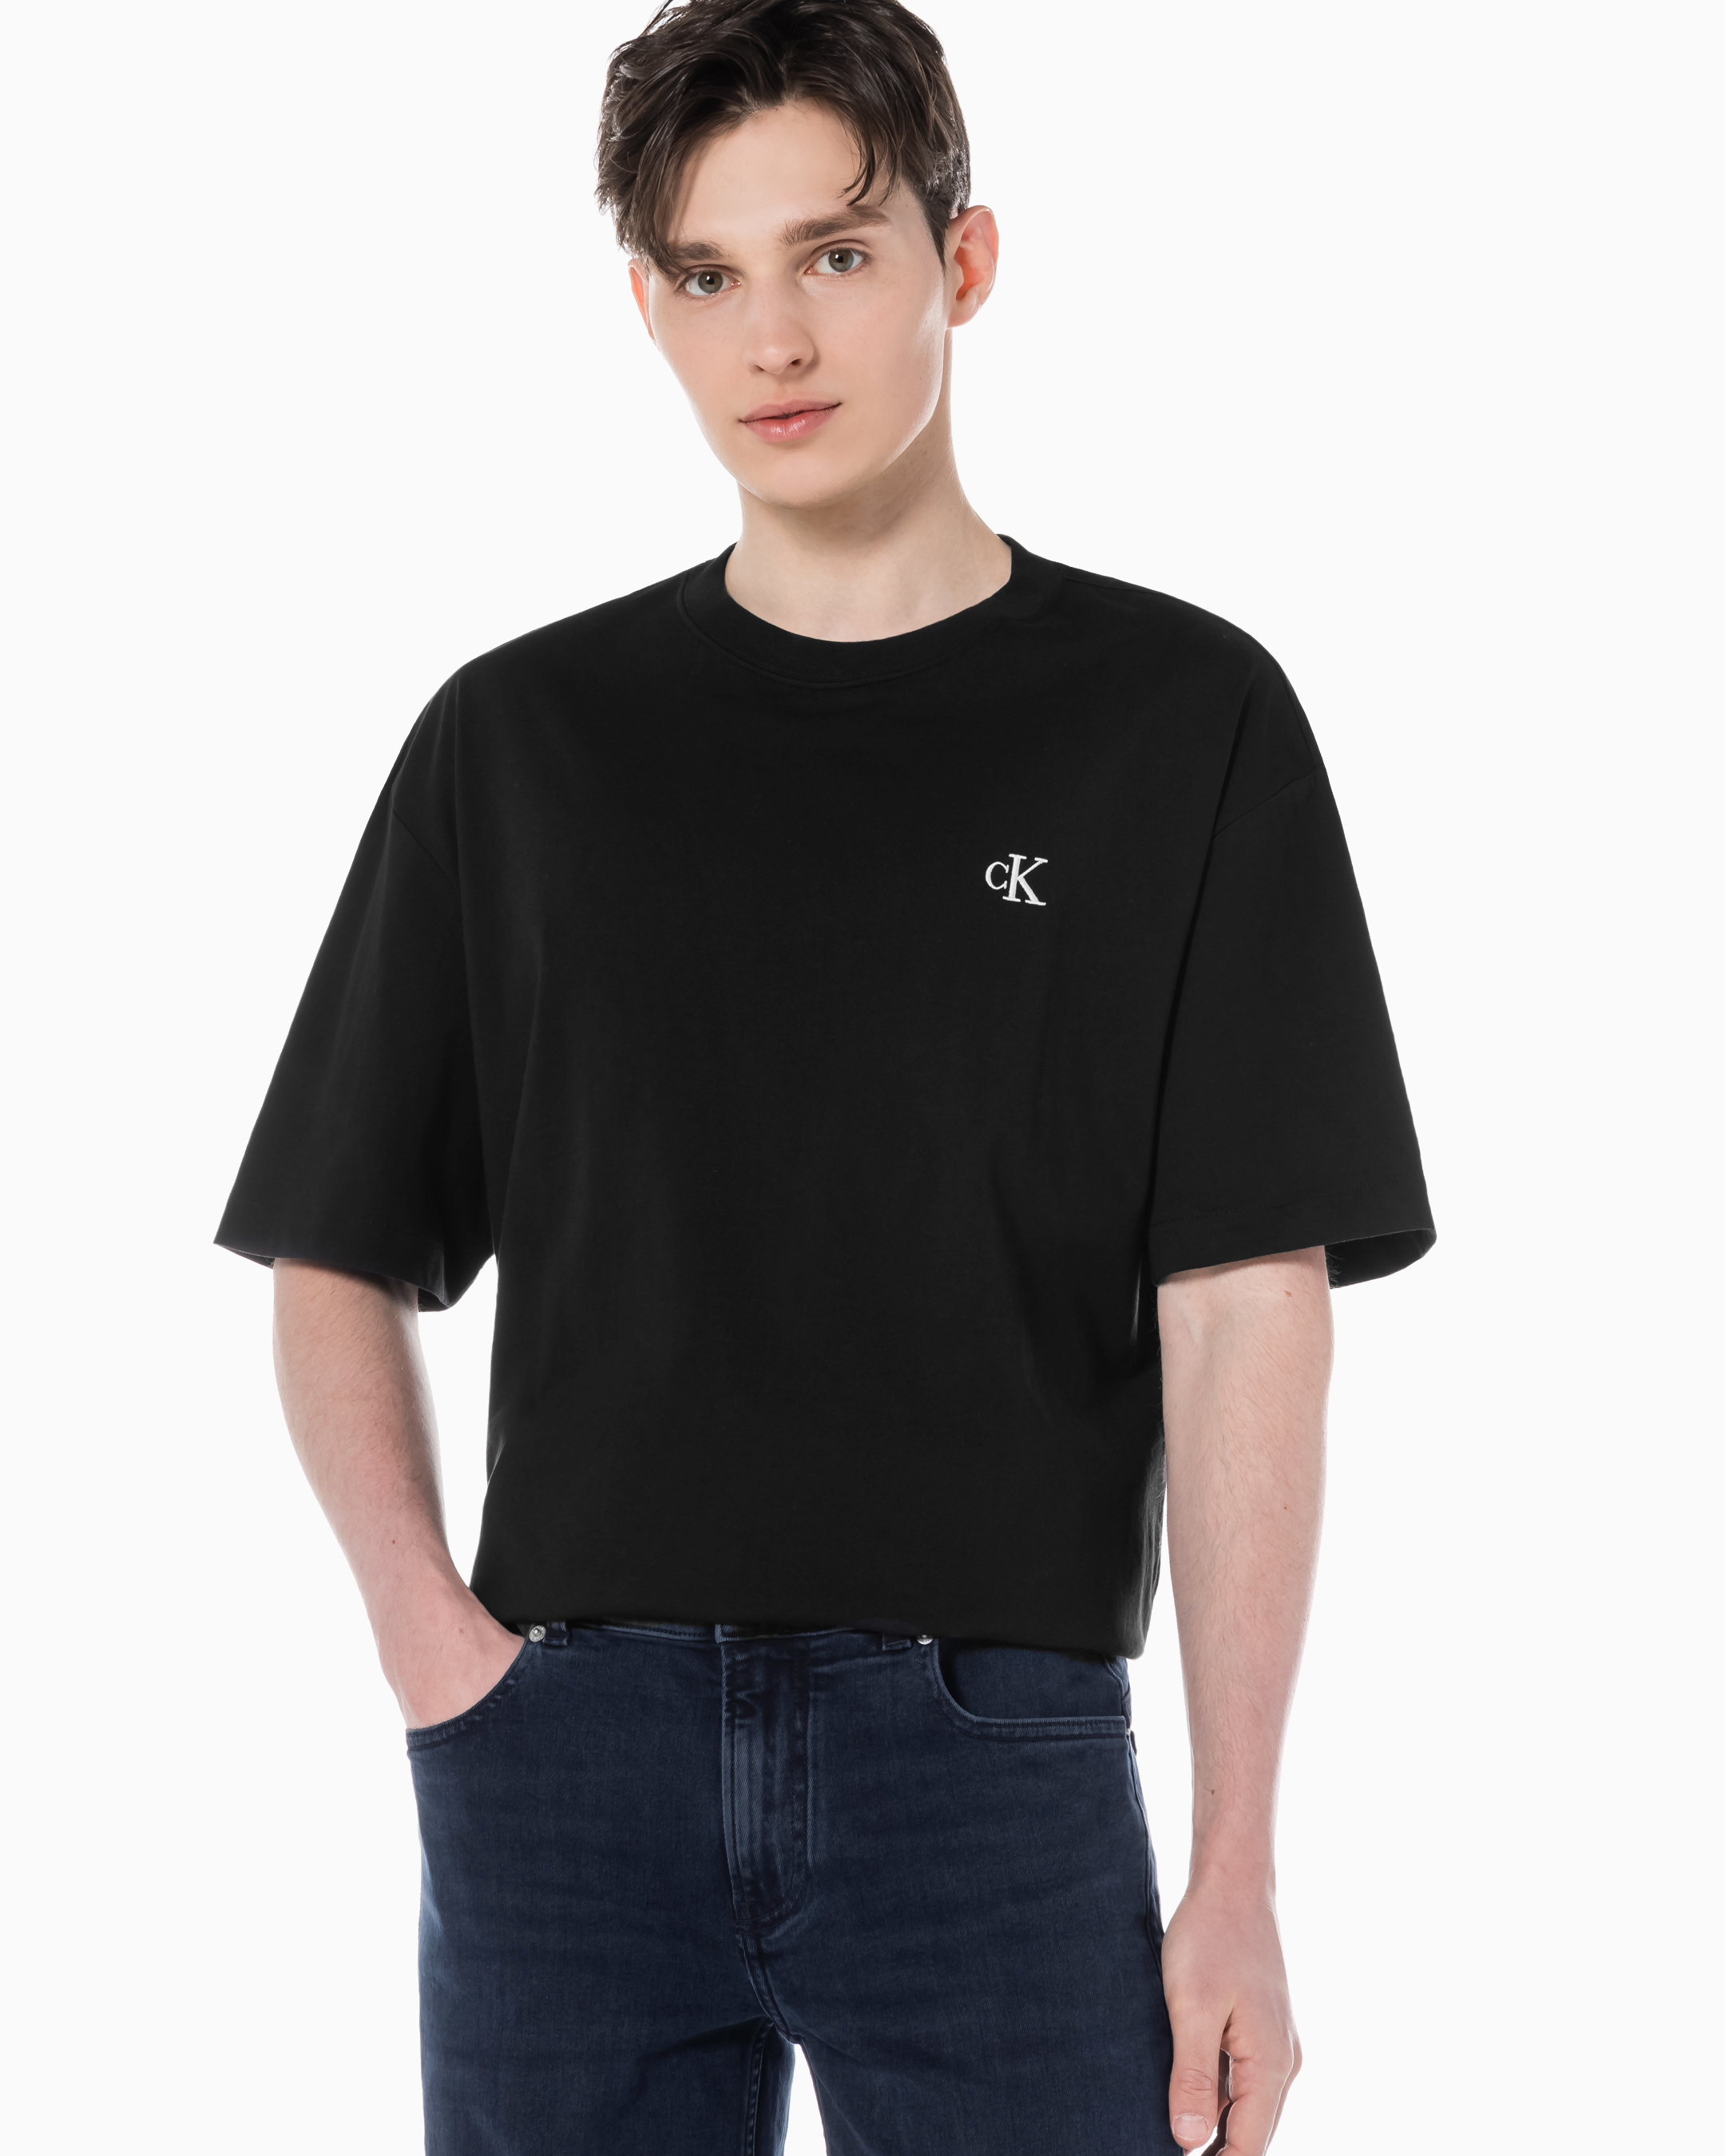 Men's Relaxed Fit Archive Logo Short Sleeve T-Shirt